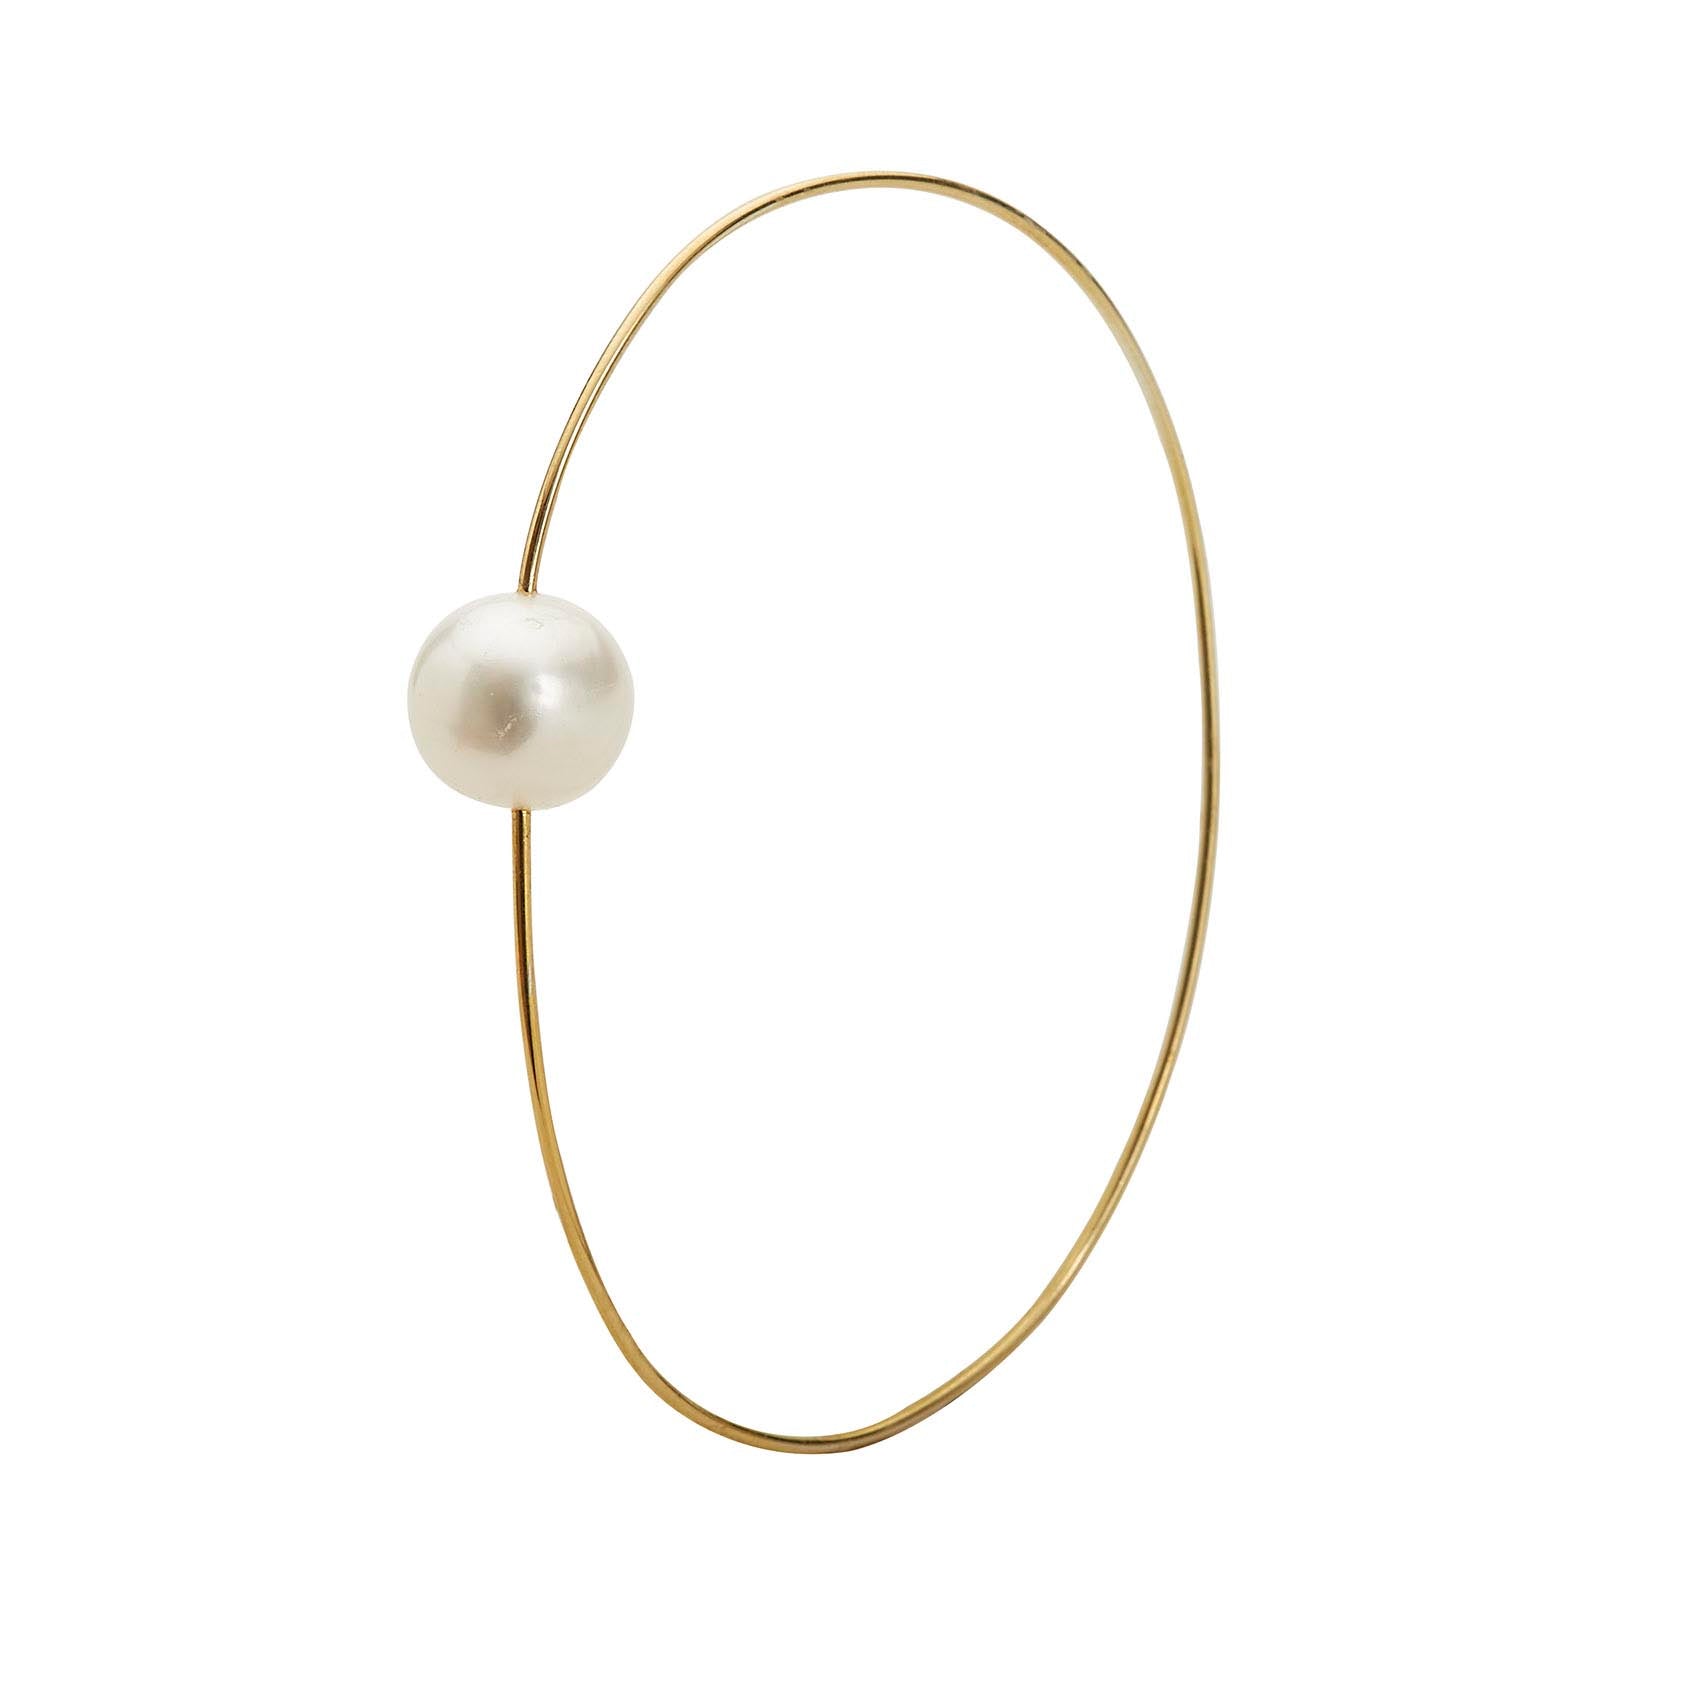 Oval Bangle with White Pearl